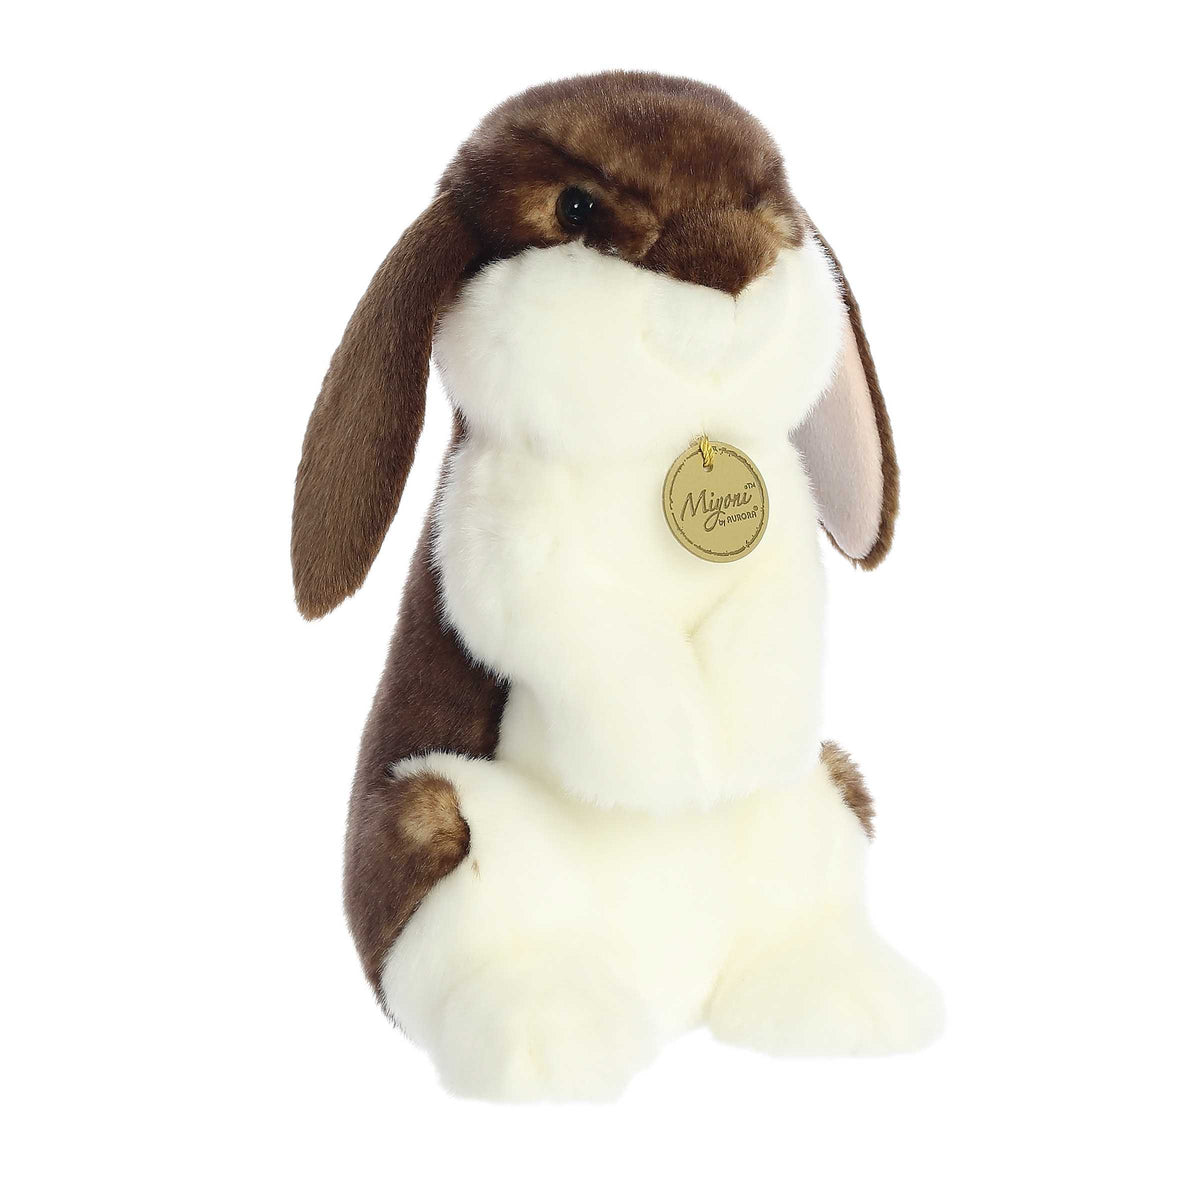 Lifelike English Lop Rabbit plush with silky fur, luscious ears, and a gentle expression, crafted for realism, by Aurora.